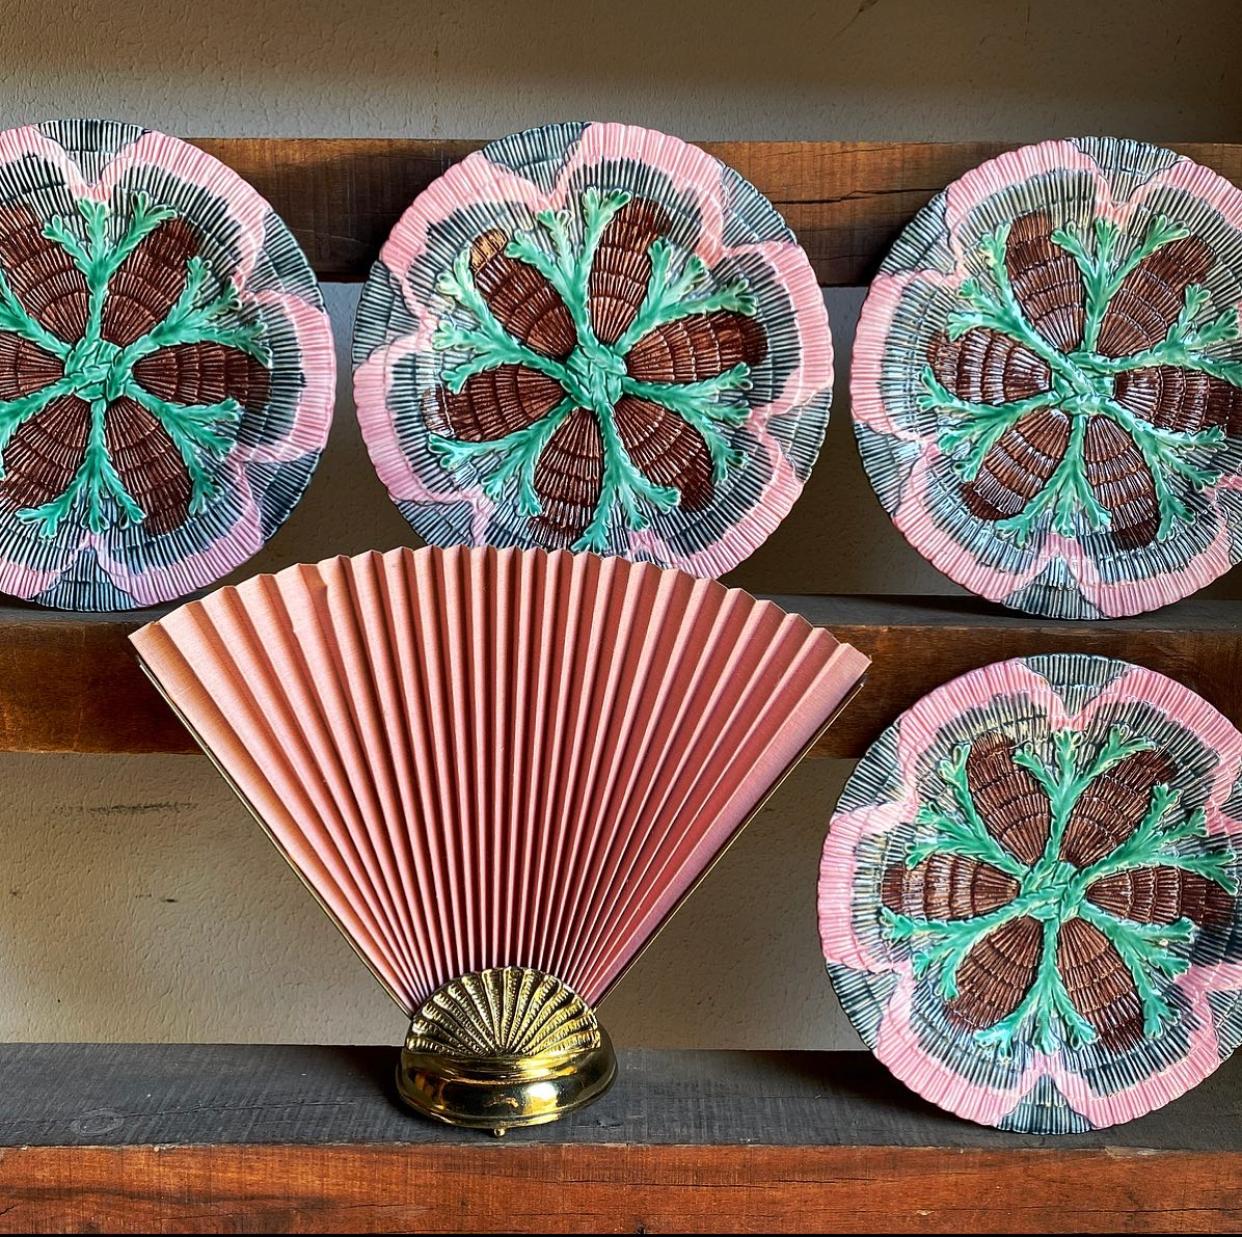 Abstract, Mid-Century Modern, Chinoiserie, or Hollywood Regency style lamp base in pink with seashell motif in gold. Reminiscent of Caprani style lighting, this beautiful pink fan lamp base is a statement piece that blurs the lines between art and